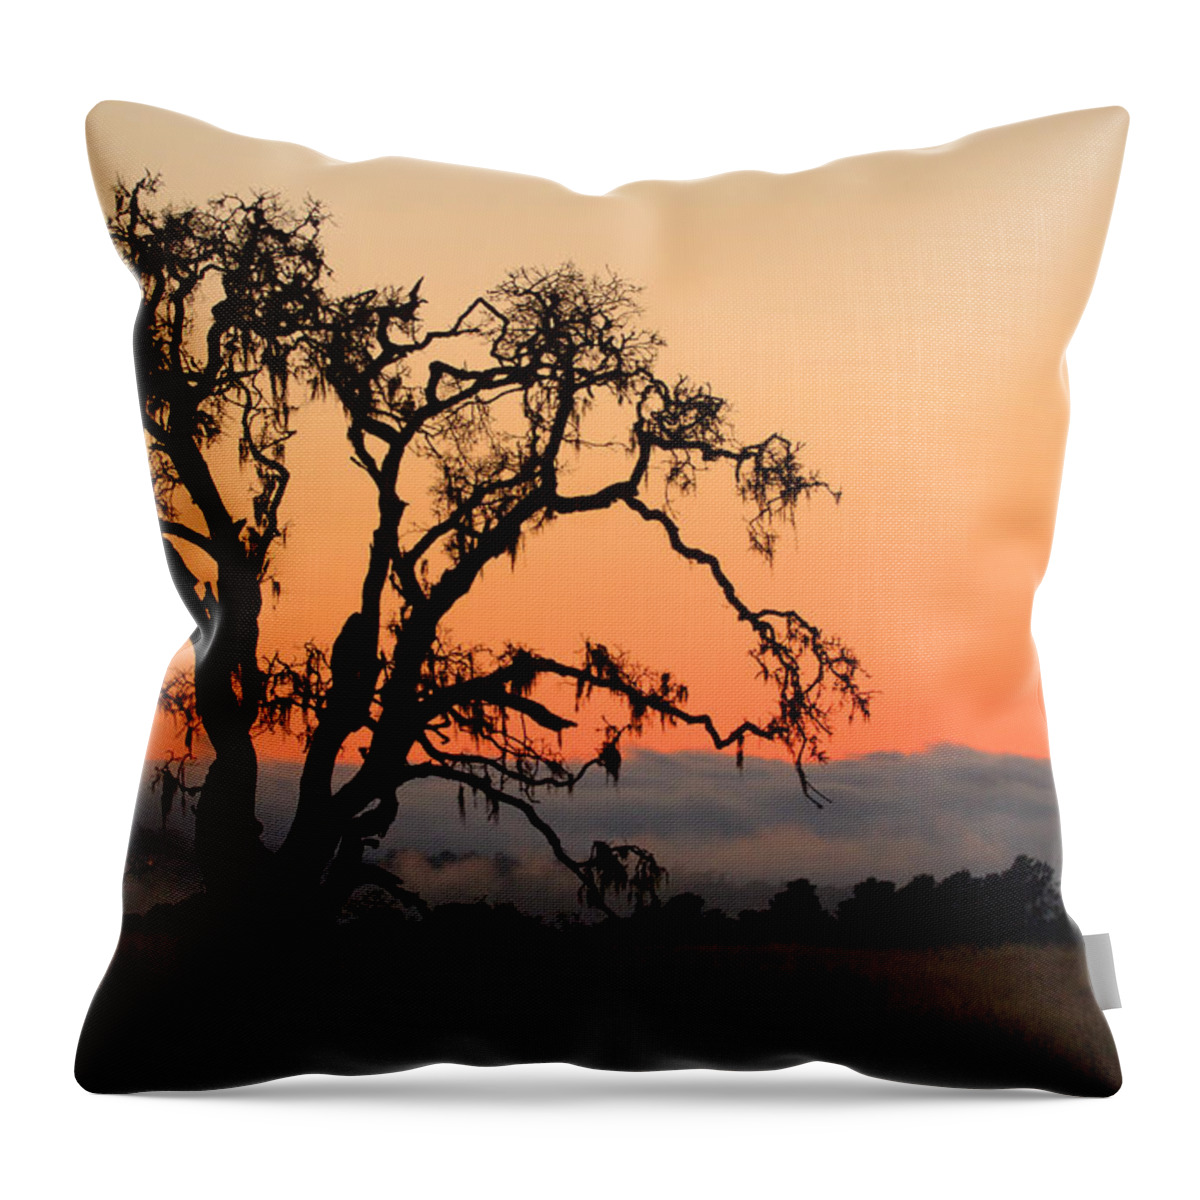 Tree Fog Landscape Weather Sunset Orange Nature Botanical Throw Pillow featuring the photograph Loan Tree Overlooking Fog by Jill Reger